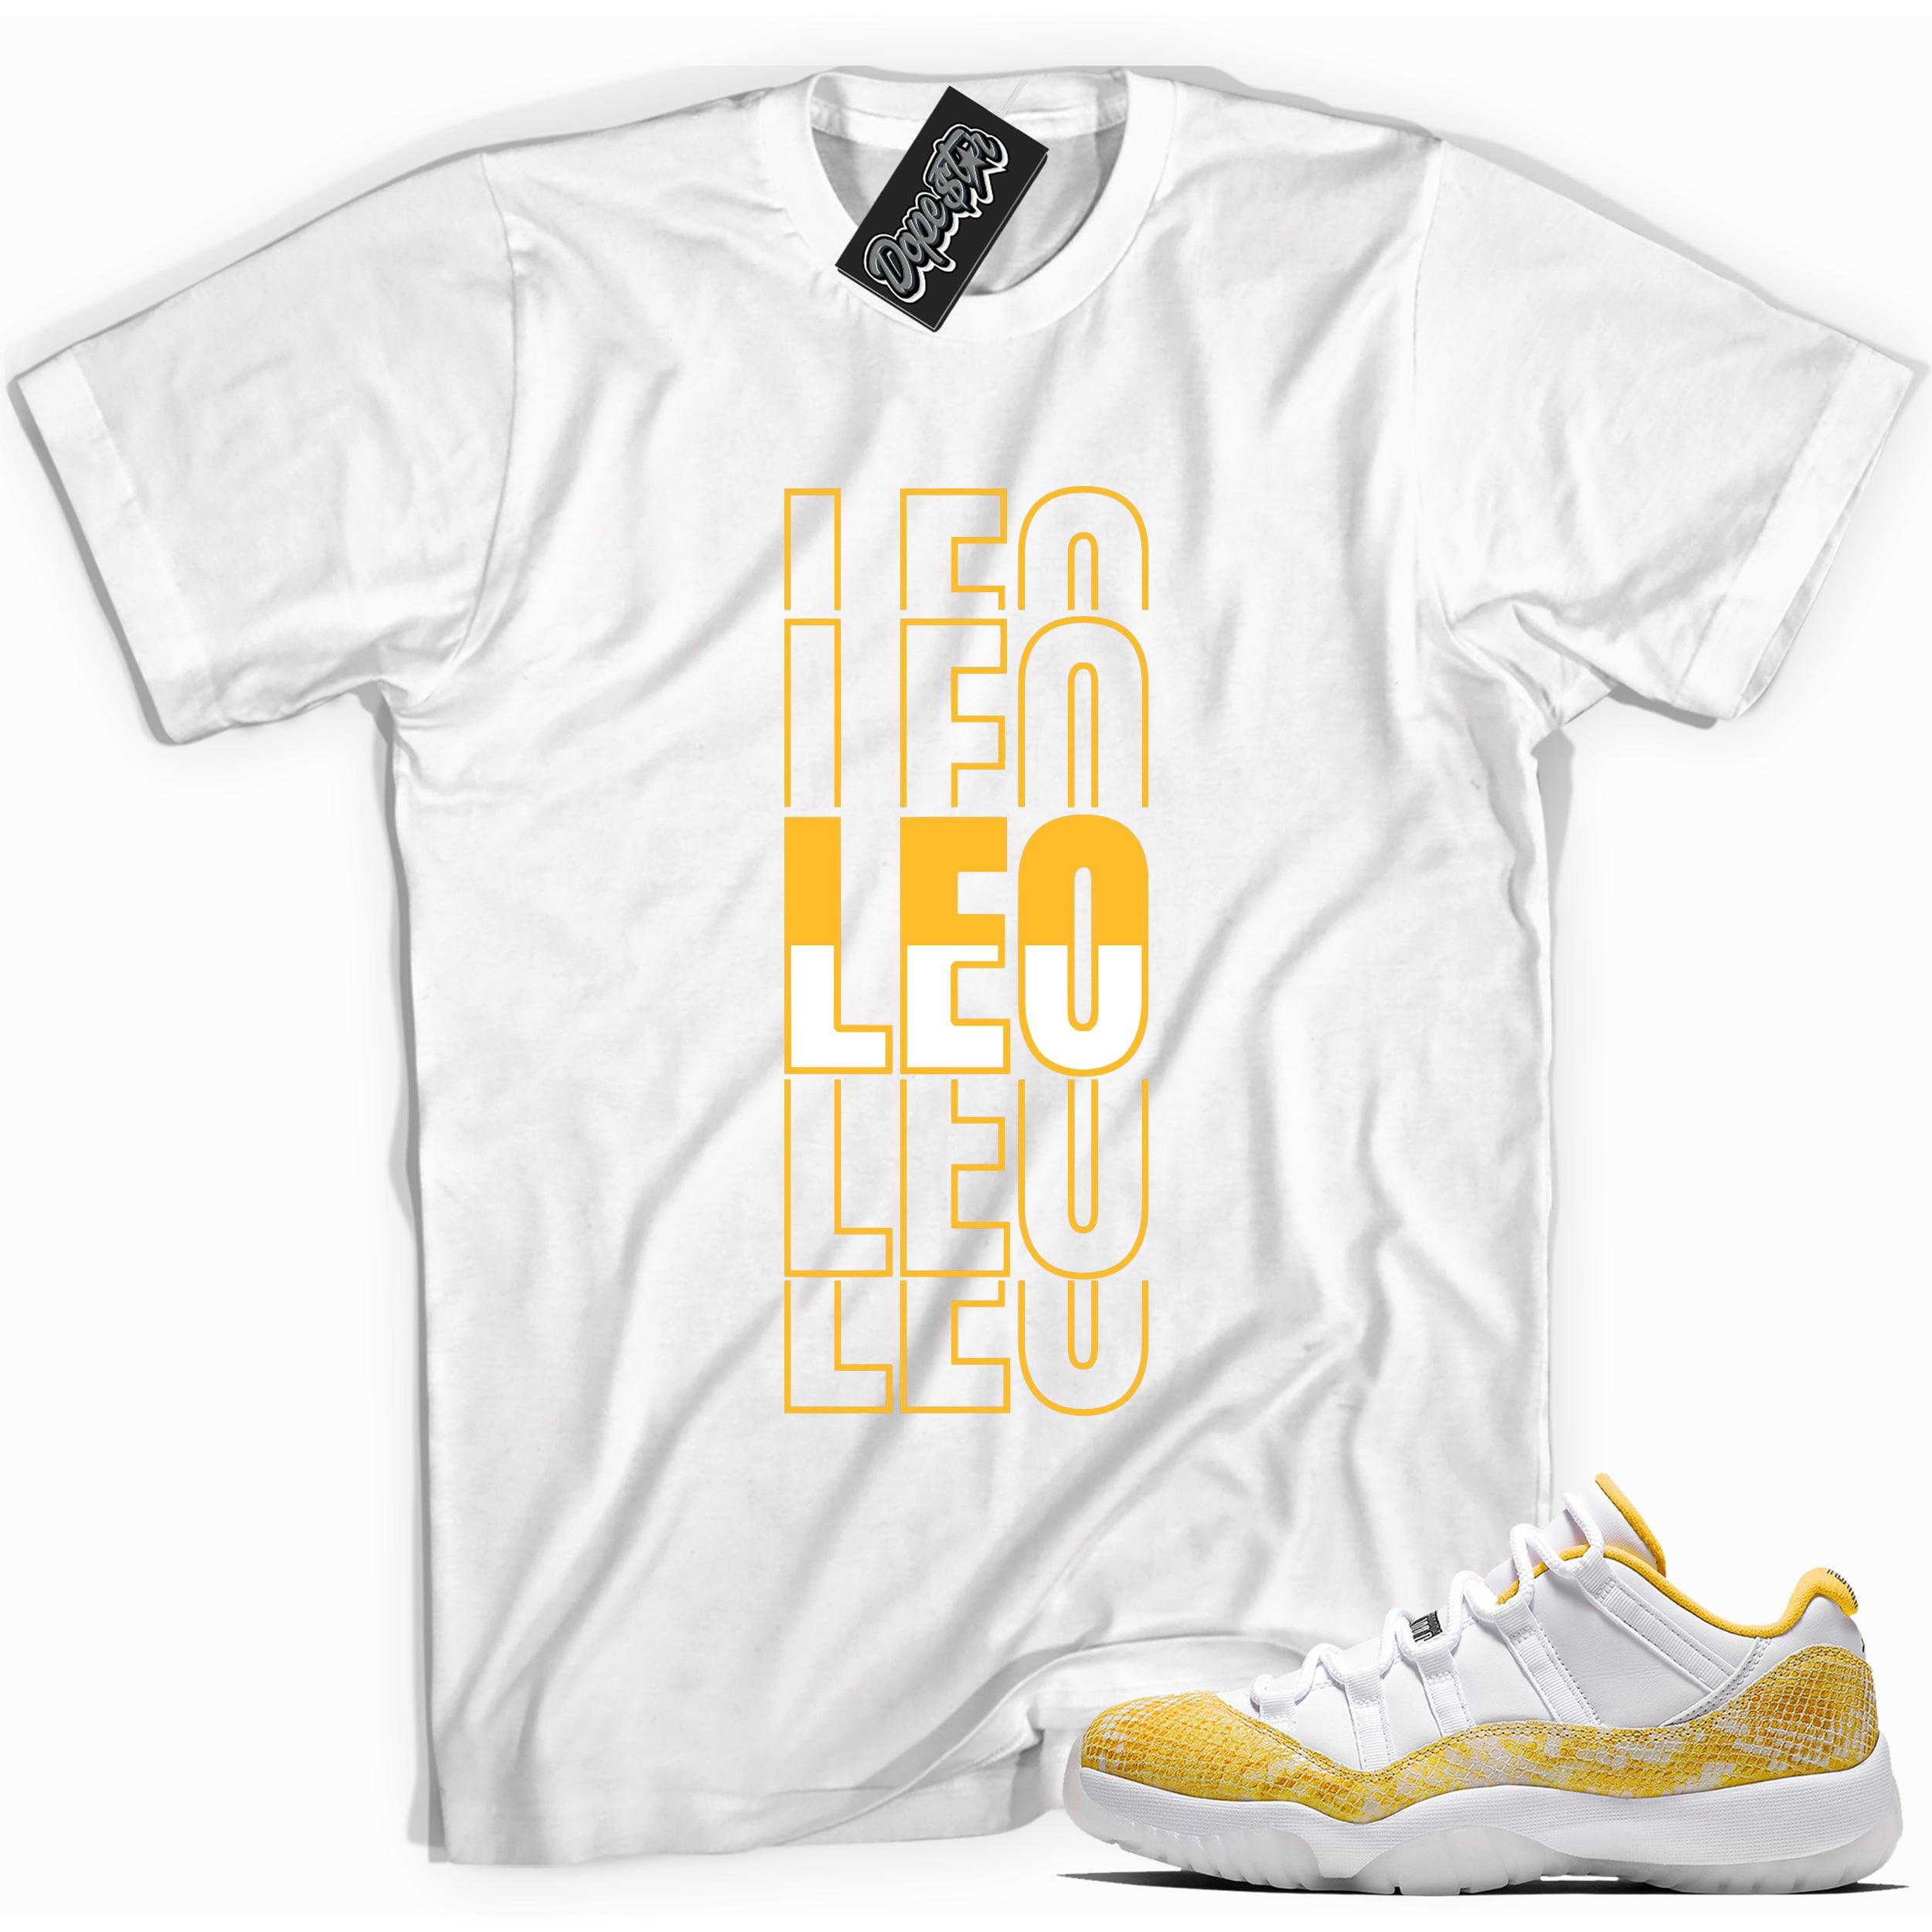 Cool white graphic tee with 'leo' print, that perfectly matches Air Jordan 11 Retro Low Yellow Snakeskin sneakers